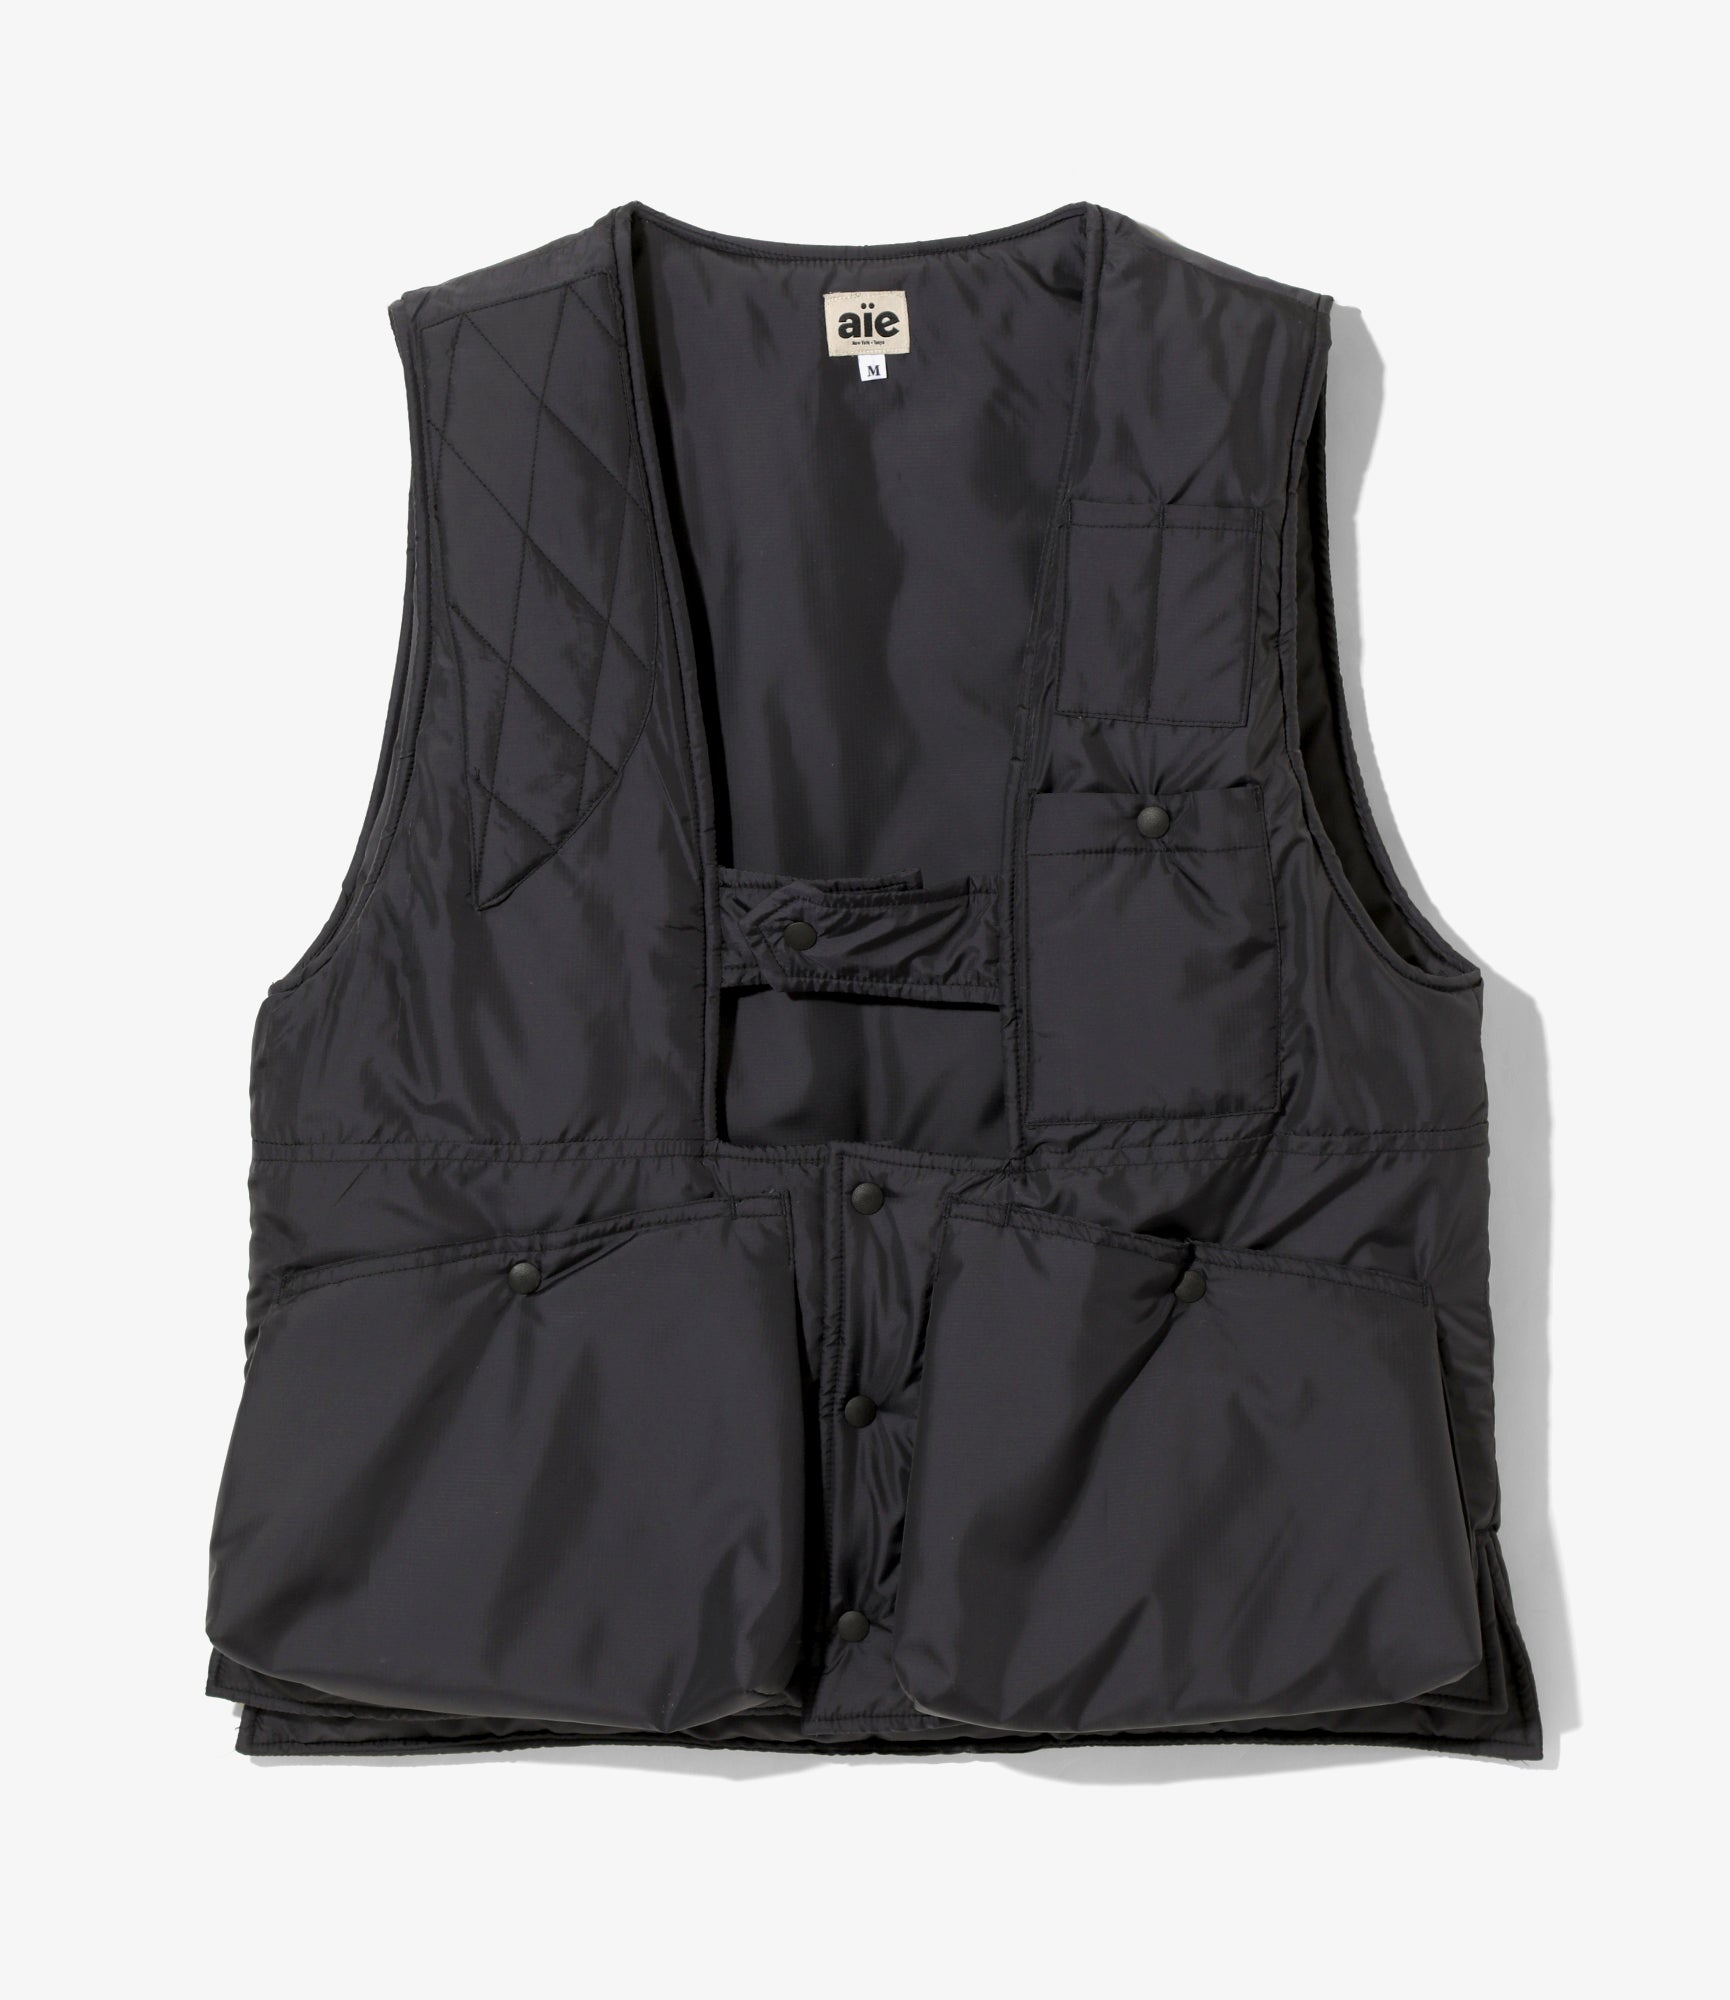 AiE Insulation Game Vest - Poly Ripstop - Navy